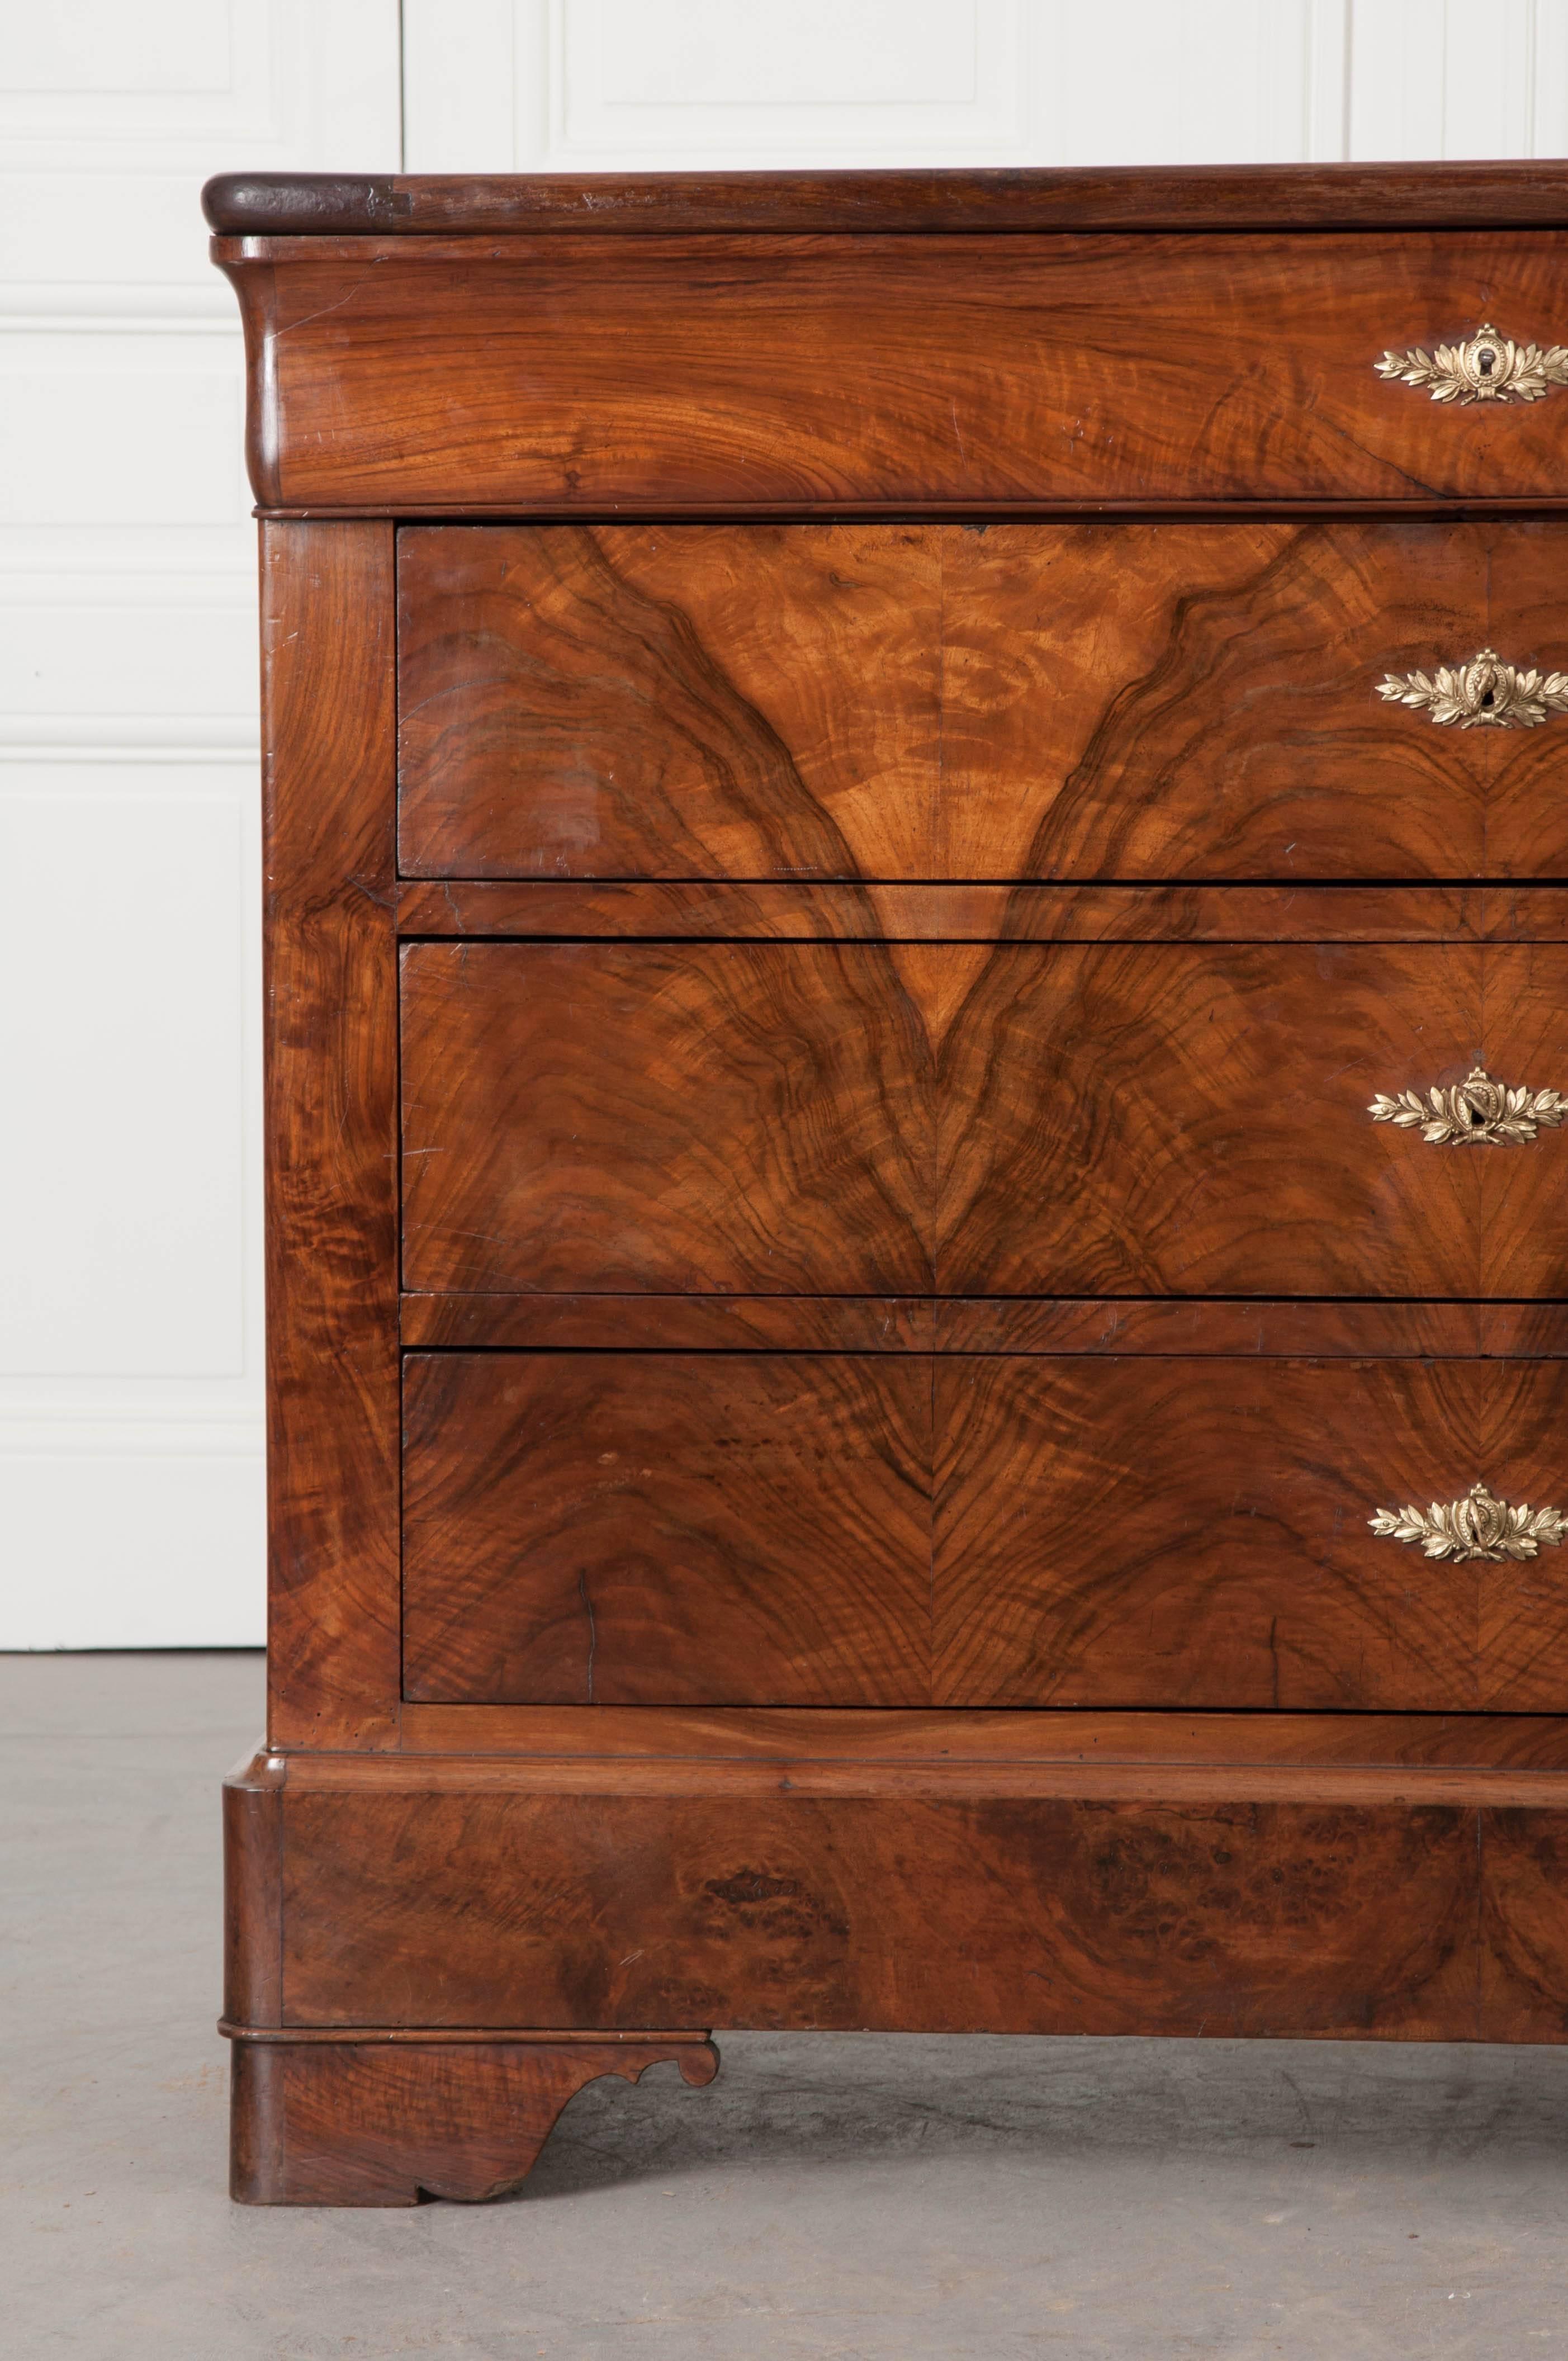 Beautifully book matched burl mahogany veneer graces the façade of this stunning 19th century Louis Philippe four drawer commodes. The top is gorgeous, with rounded front corners that match the body. The topmost drawer has a shaped front that